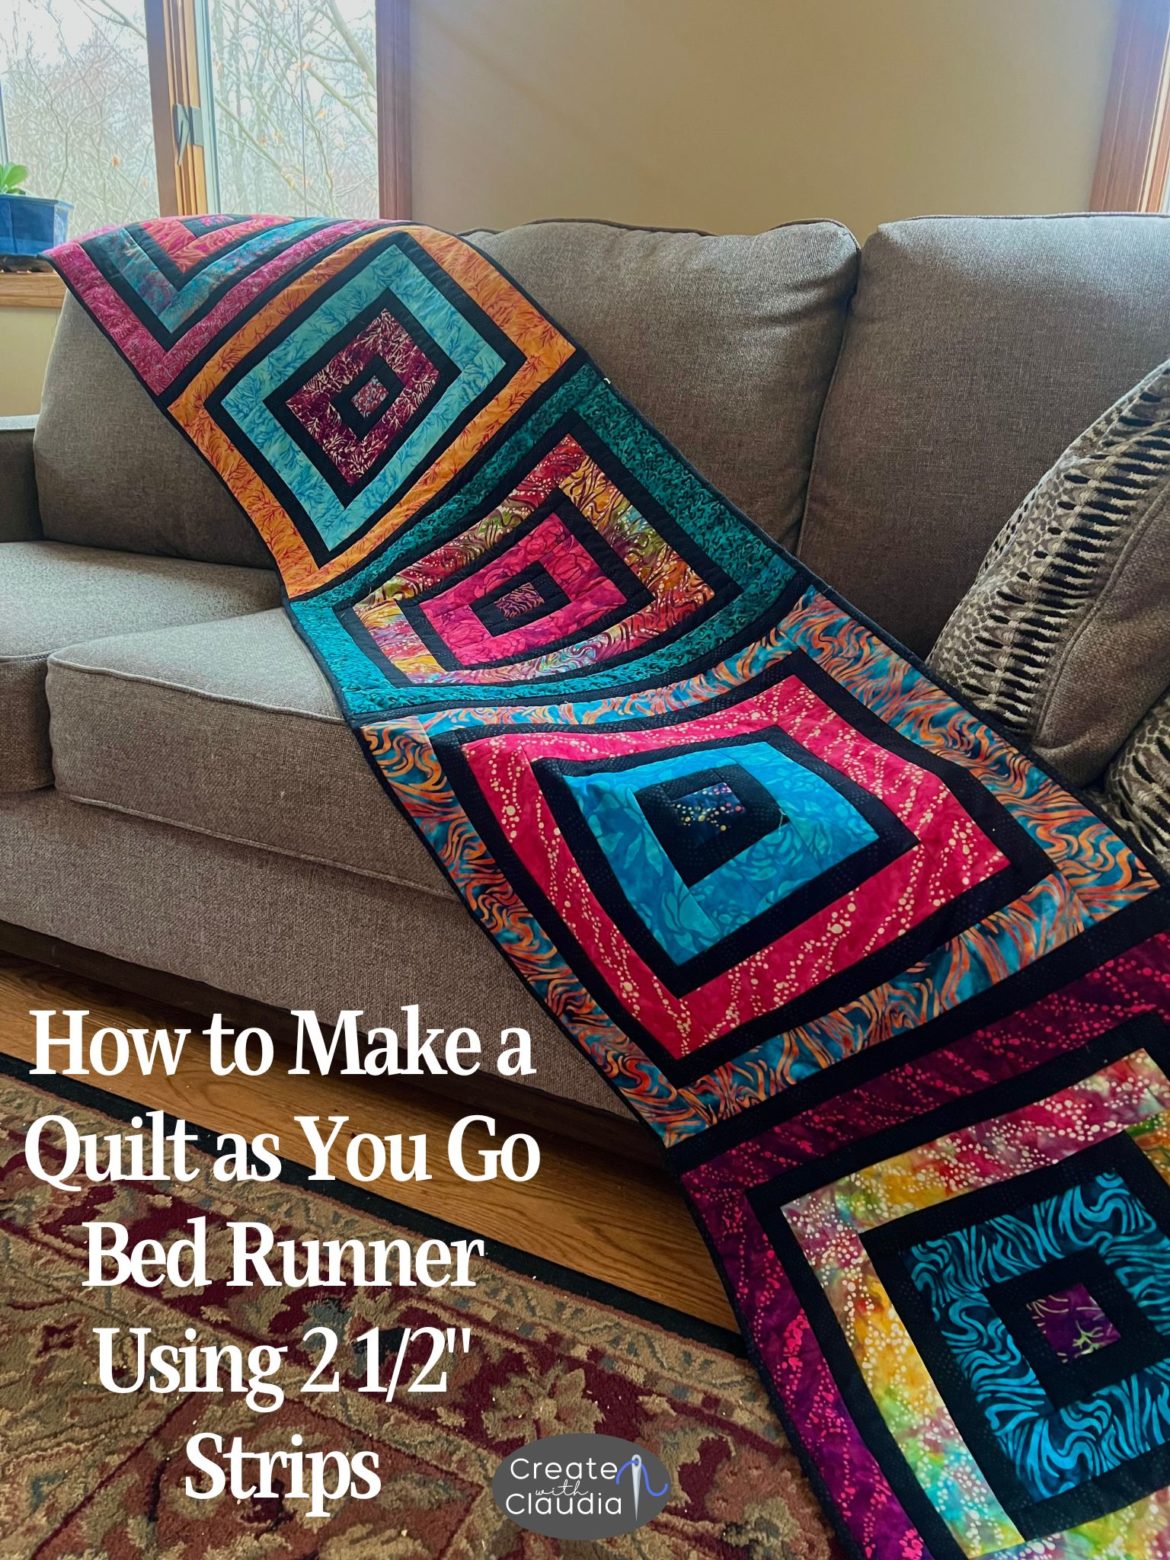 Behind the scenes of our latest  tutorial 'Quilt As You Go